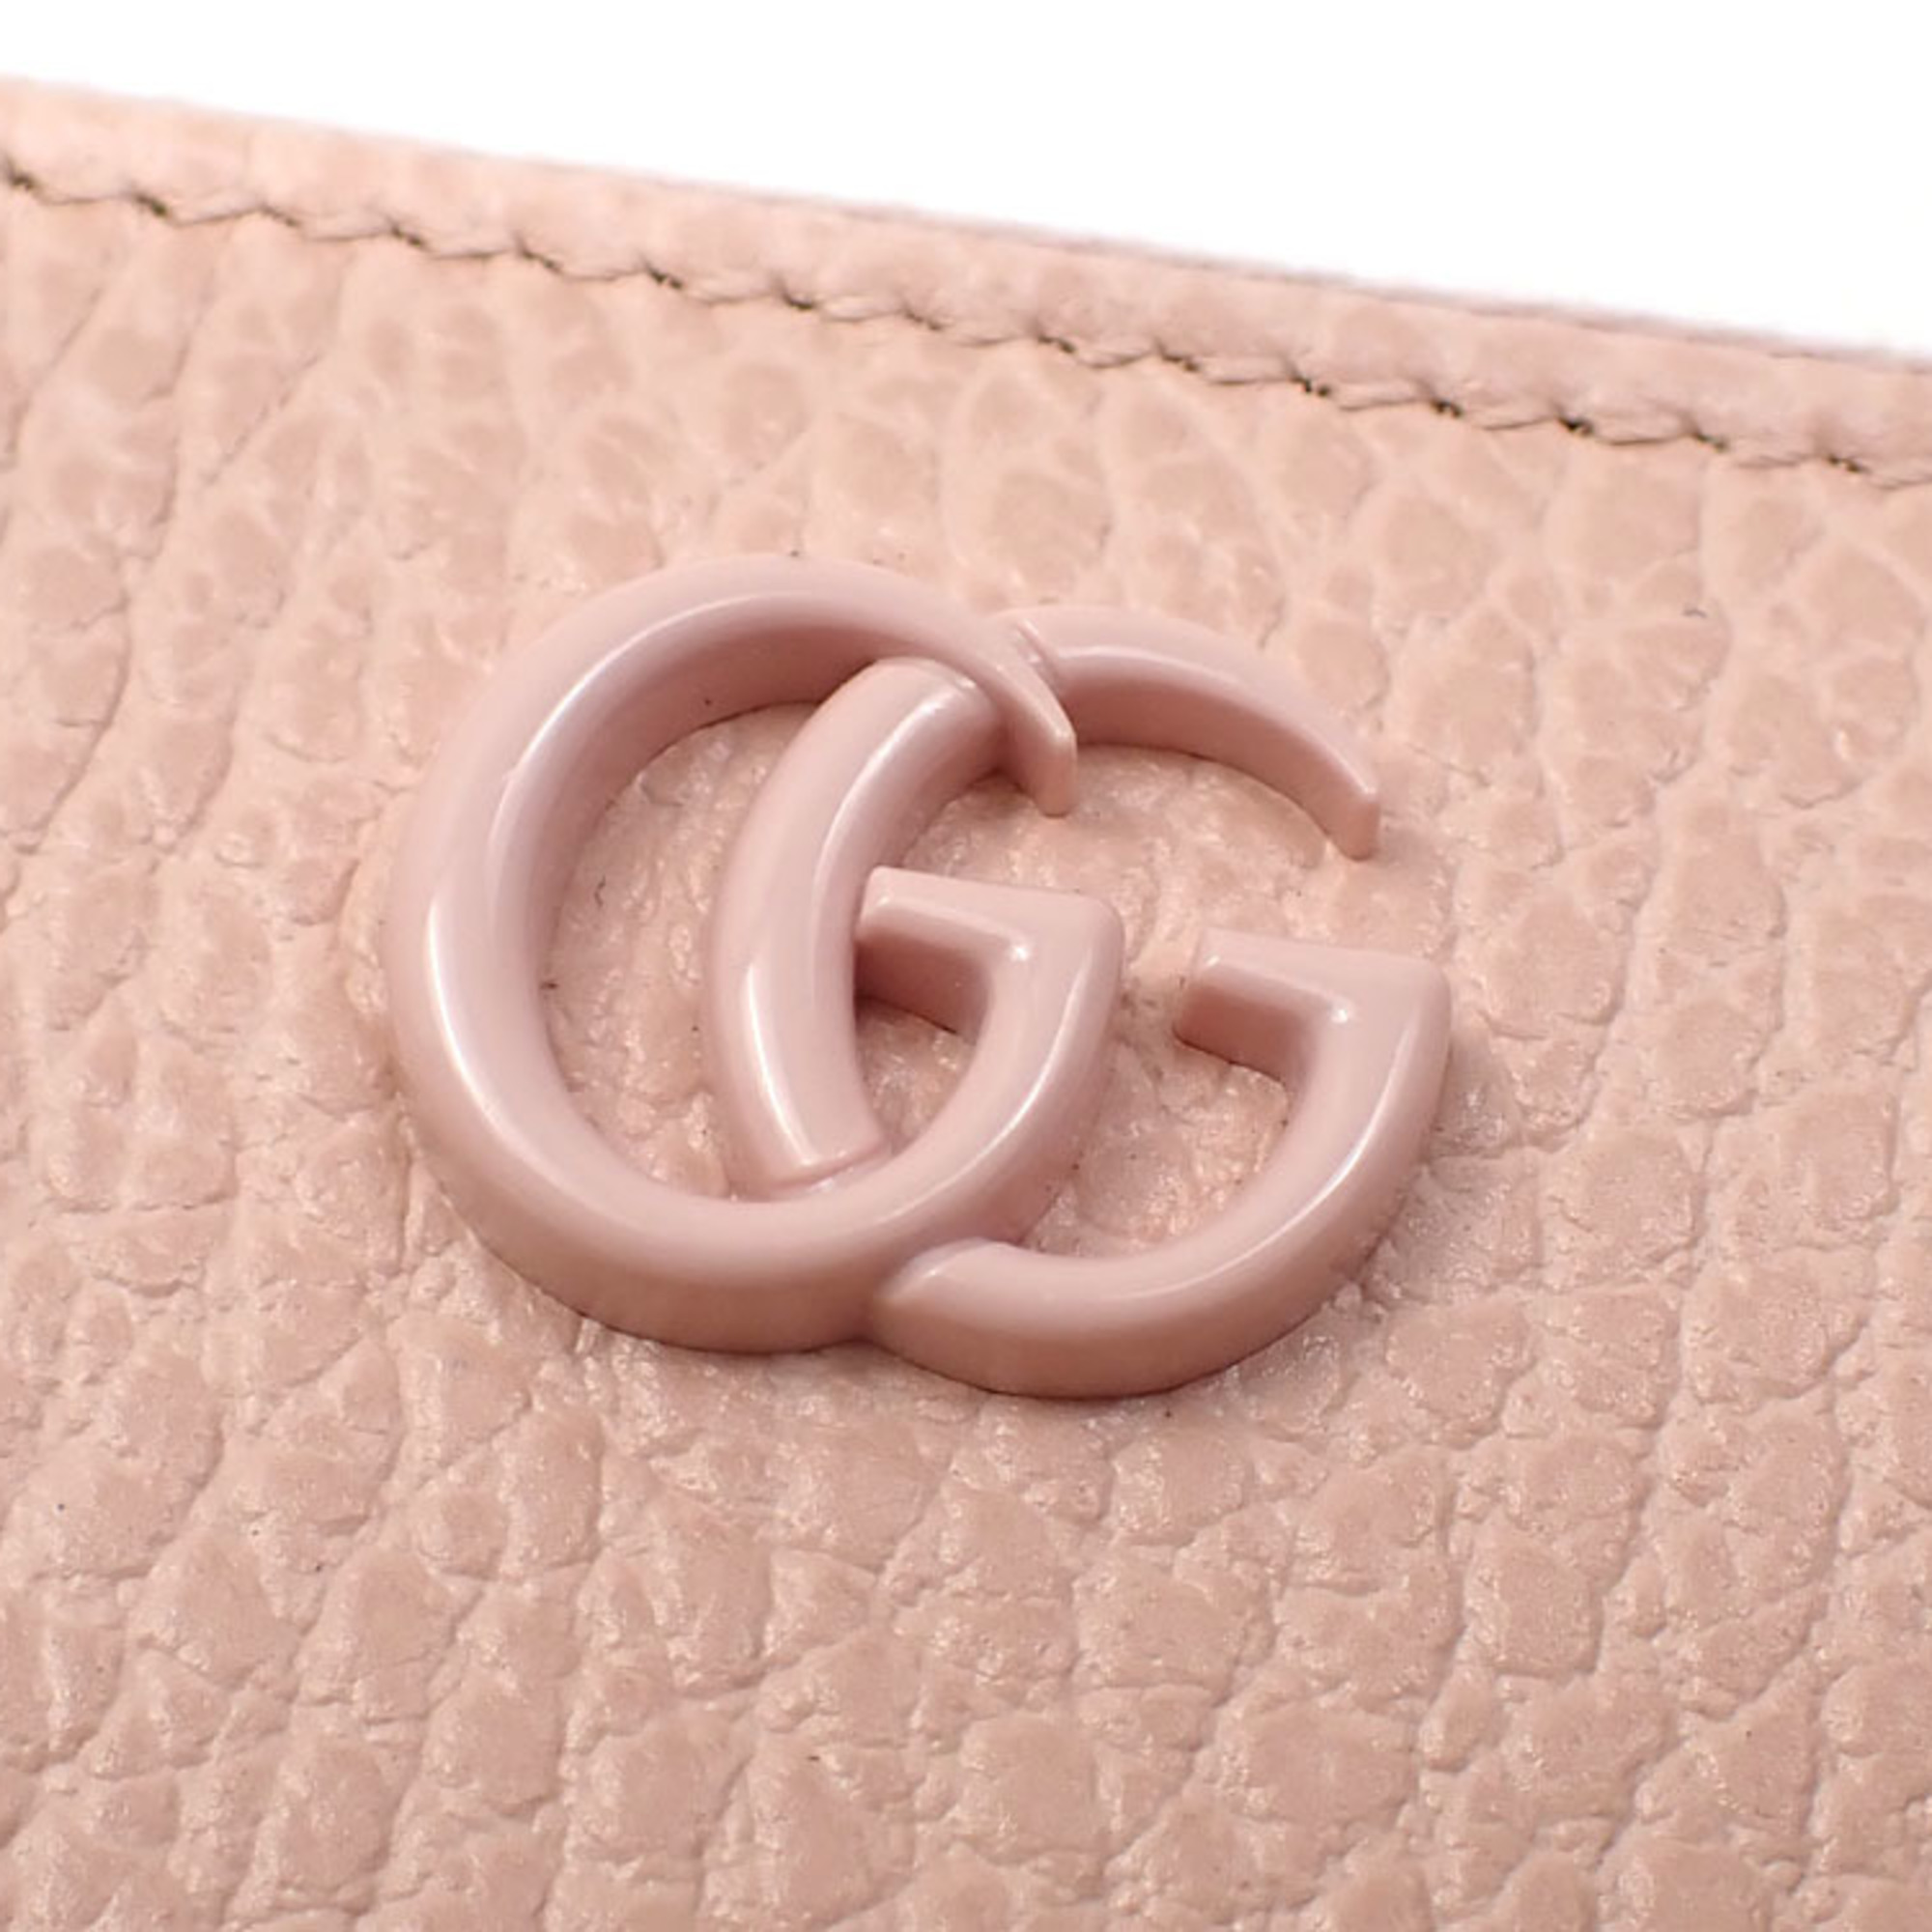 Gucci Coin Case and Card Double G Zip Around Wallet for Women Pink Leather 644412 Purse